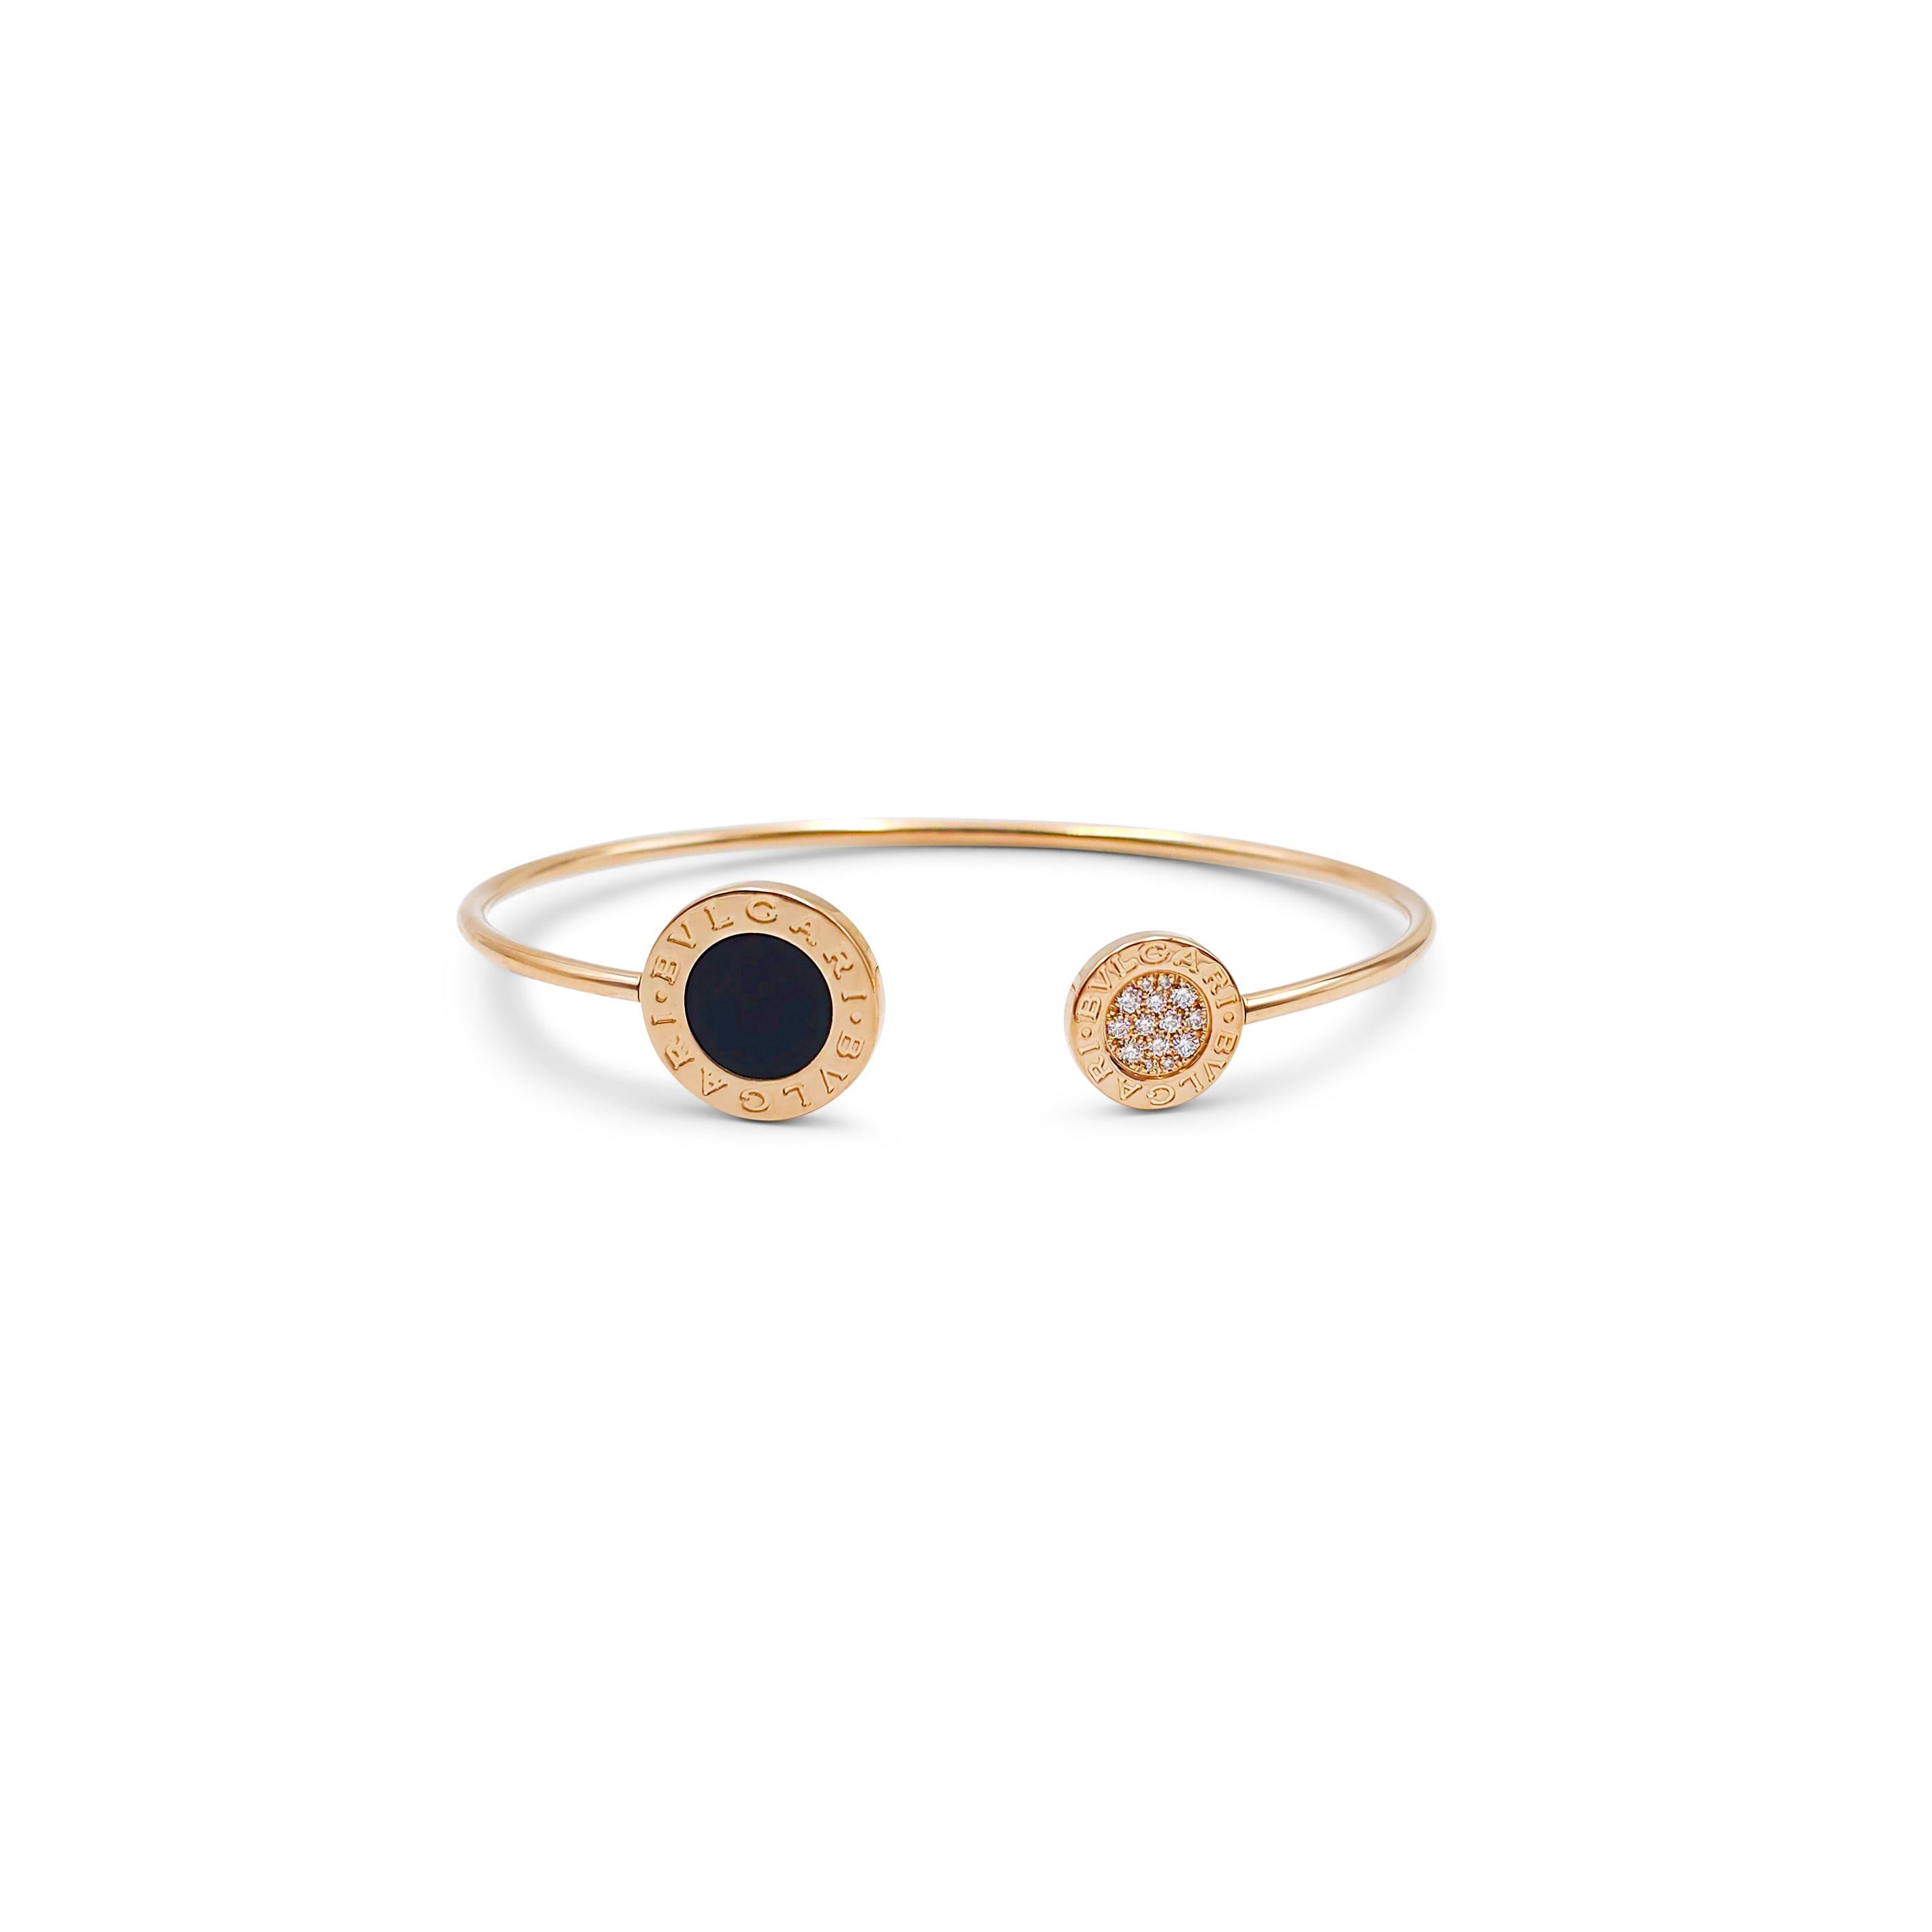 Authentic Bvlgari bracelet from the Bvlgari Bvlgari collection crafted in 18 karat rose gold.  This sleek narrow bangle features the double Bvlgari logo at either end of the split opening.  One end is set with onyx, the other is set with